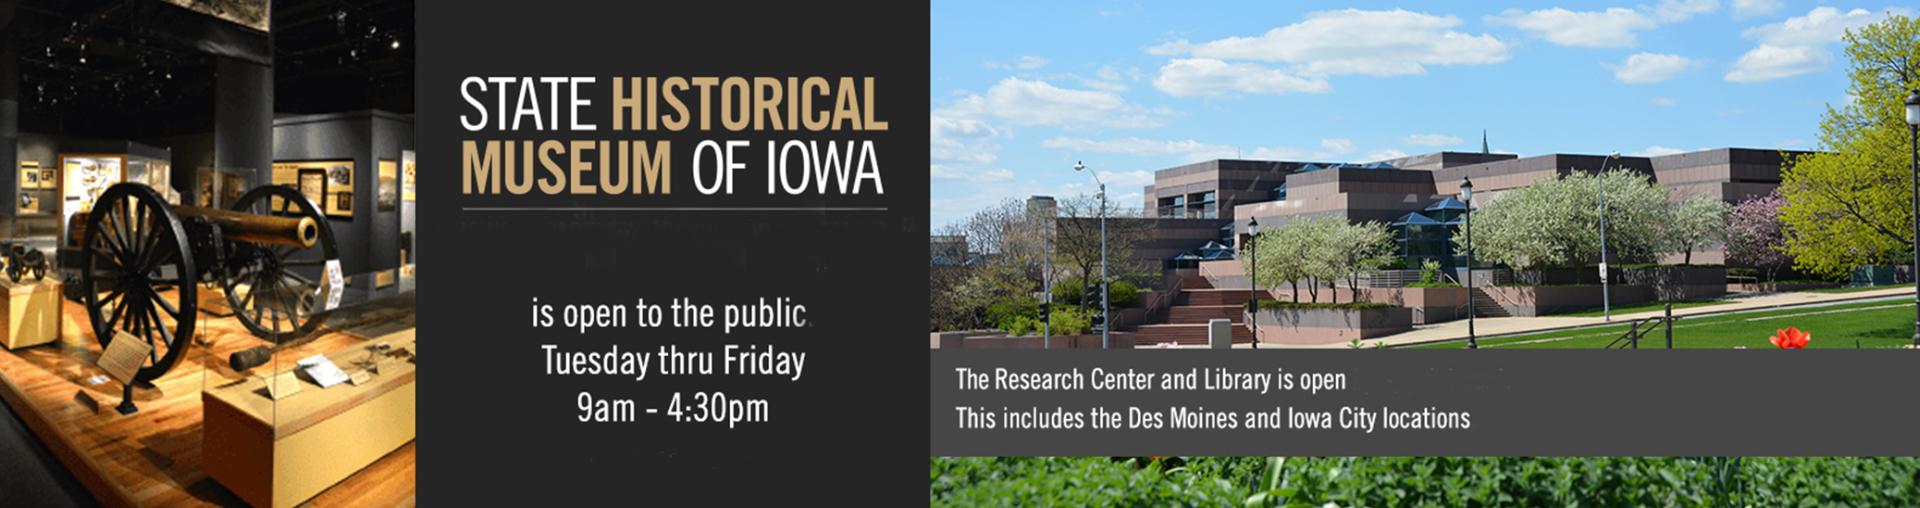 State Historical Society of Iowa Webpage banner